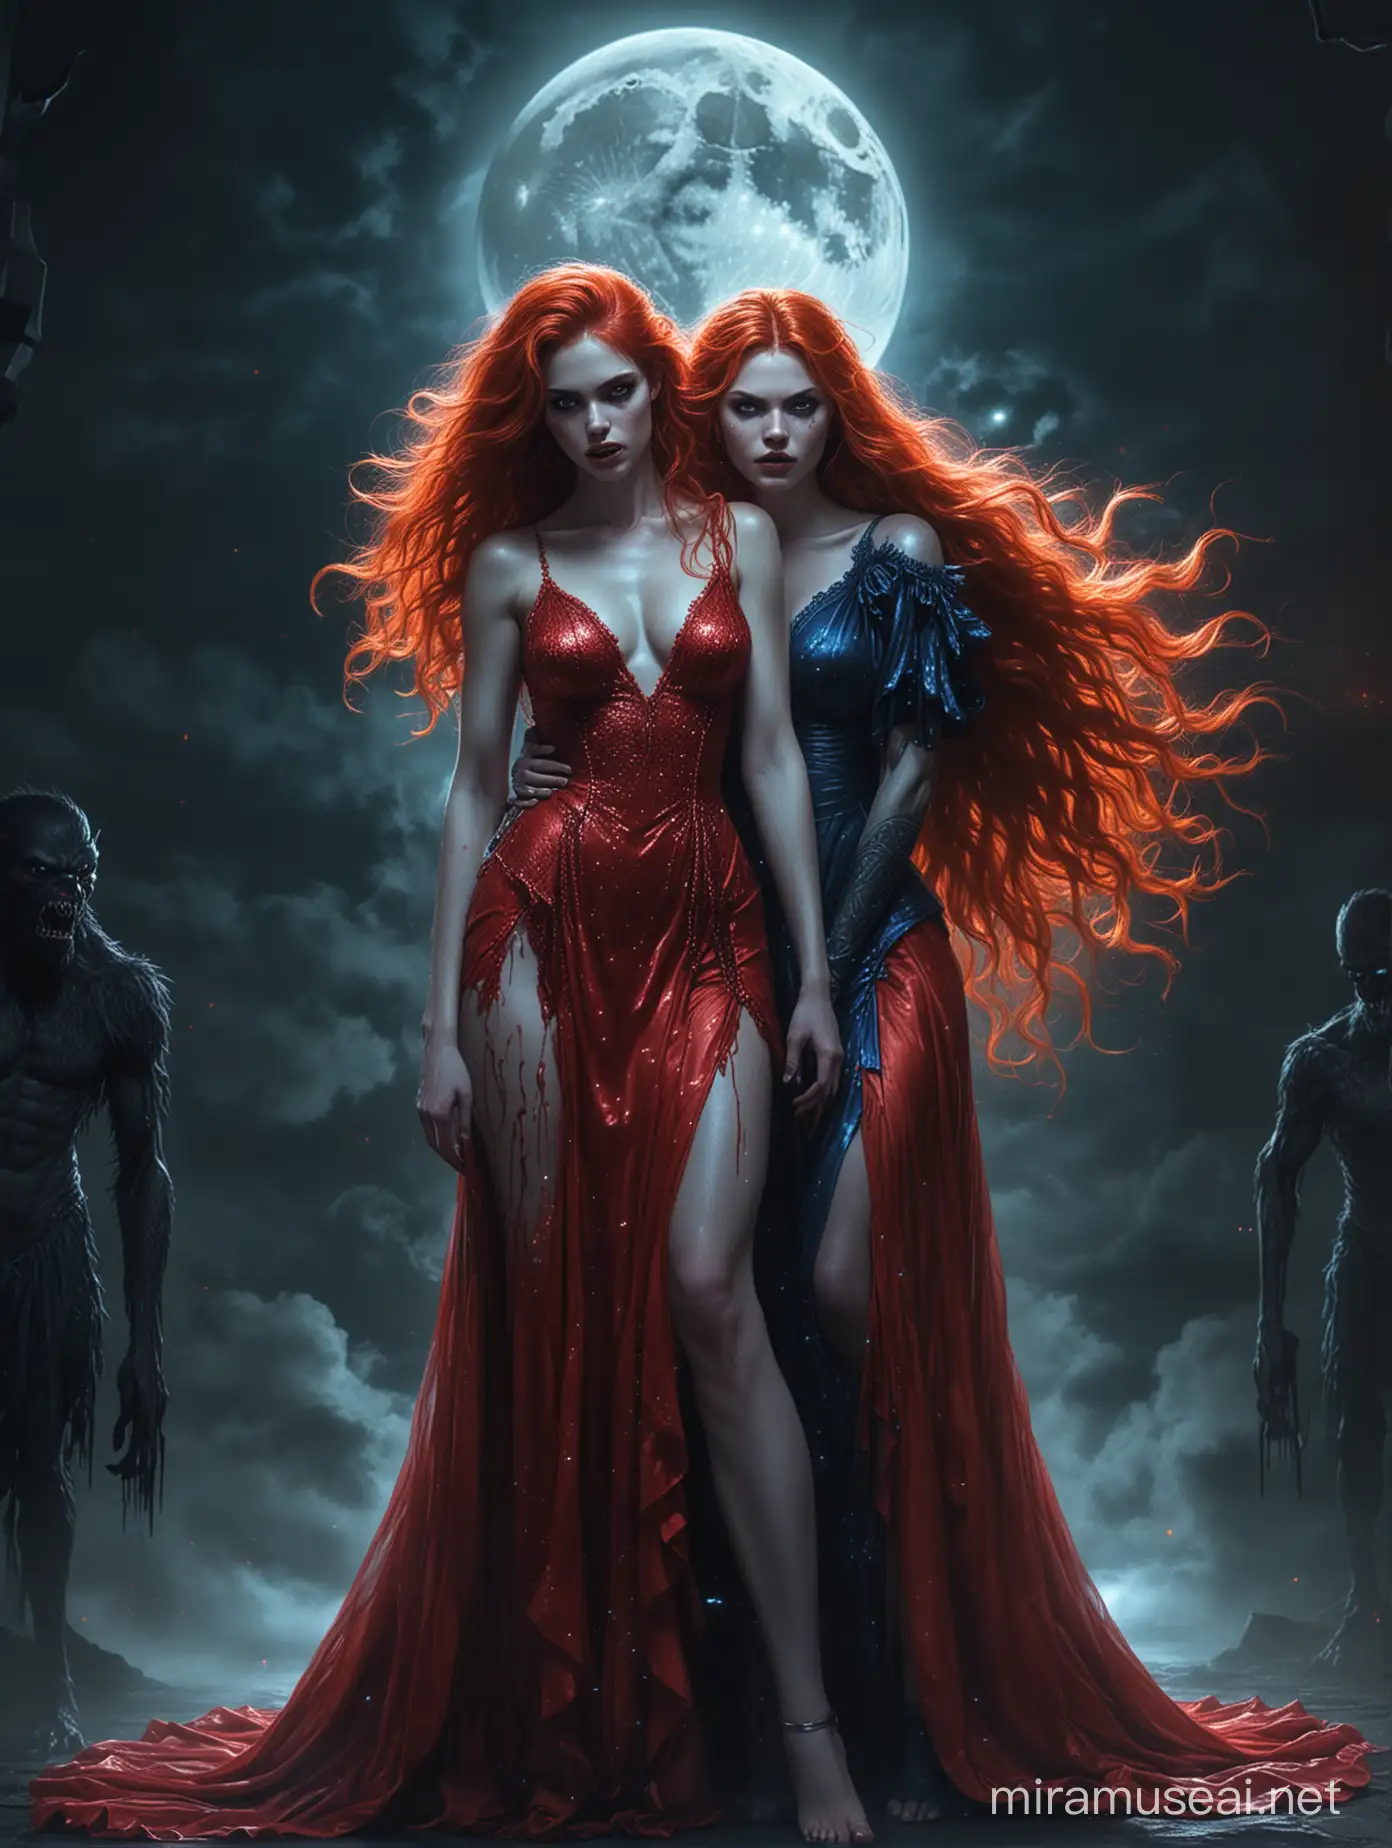 Two beautiful red hair ladies in a glowing bloody red dress and the other in a sparkling blue glowing dress, leaning back to back against each other, with a mighty black creepy werewolf standing fierce behind her in the dark night, and a glowing moon with a goddess face shining inside it.